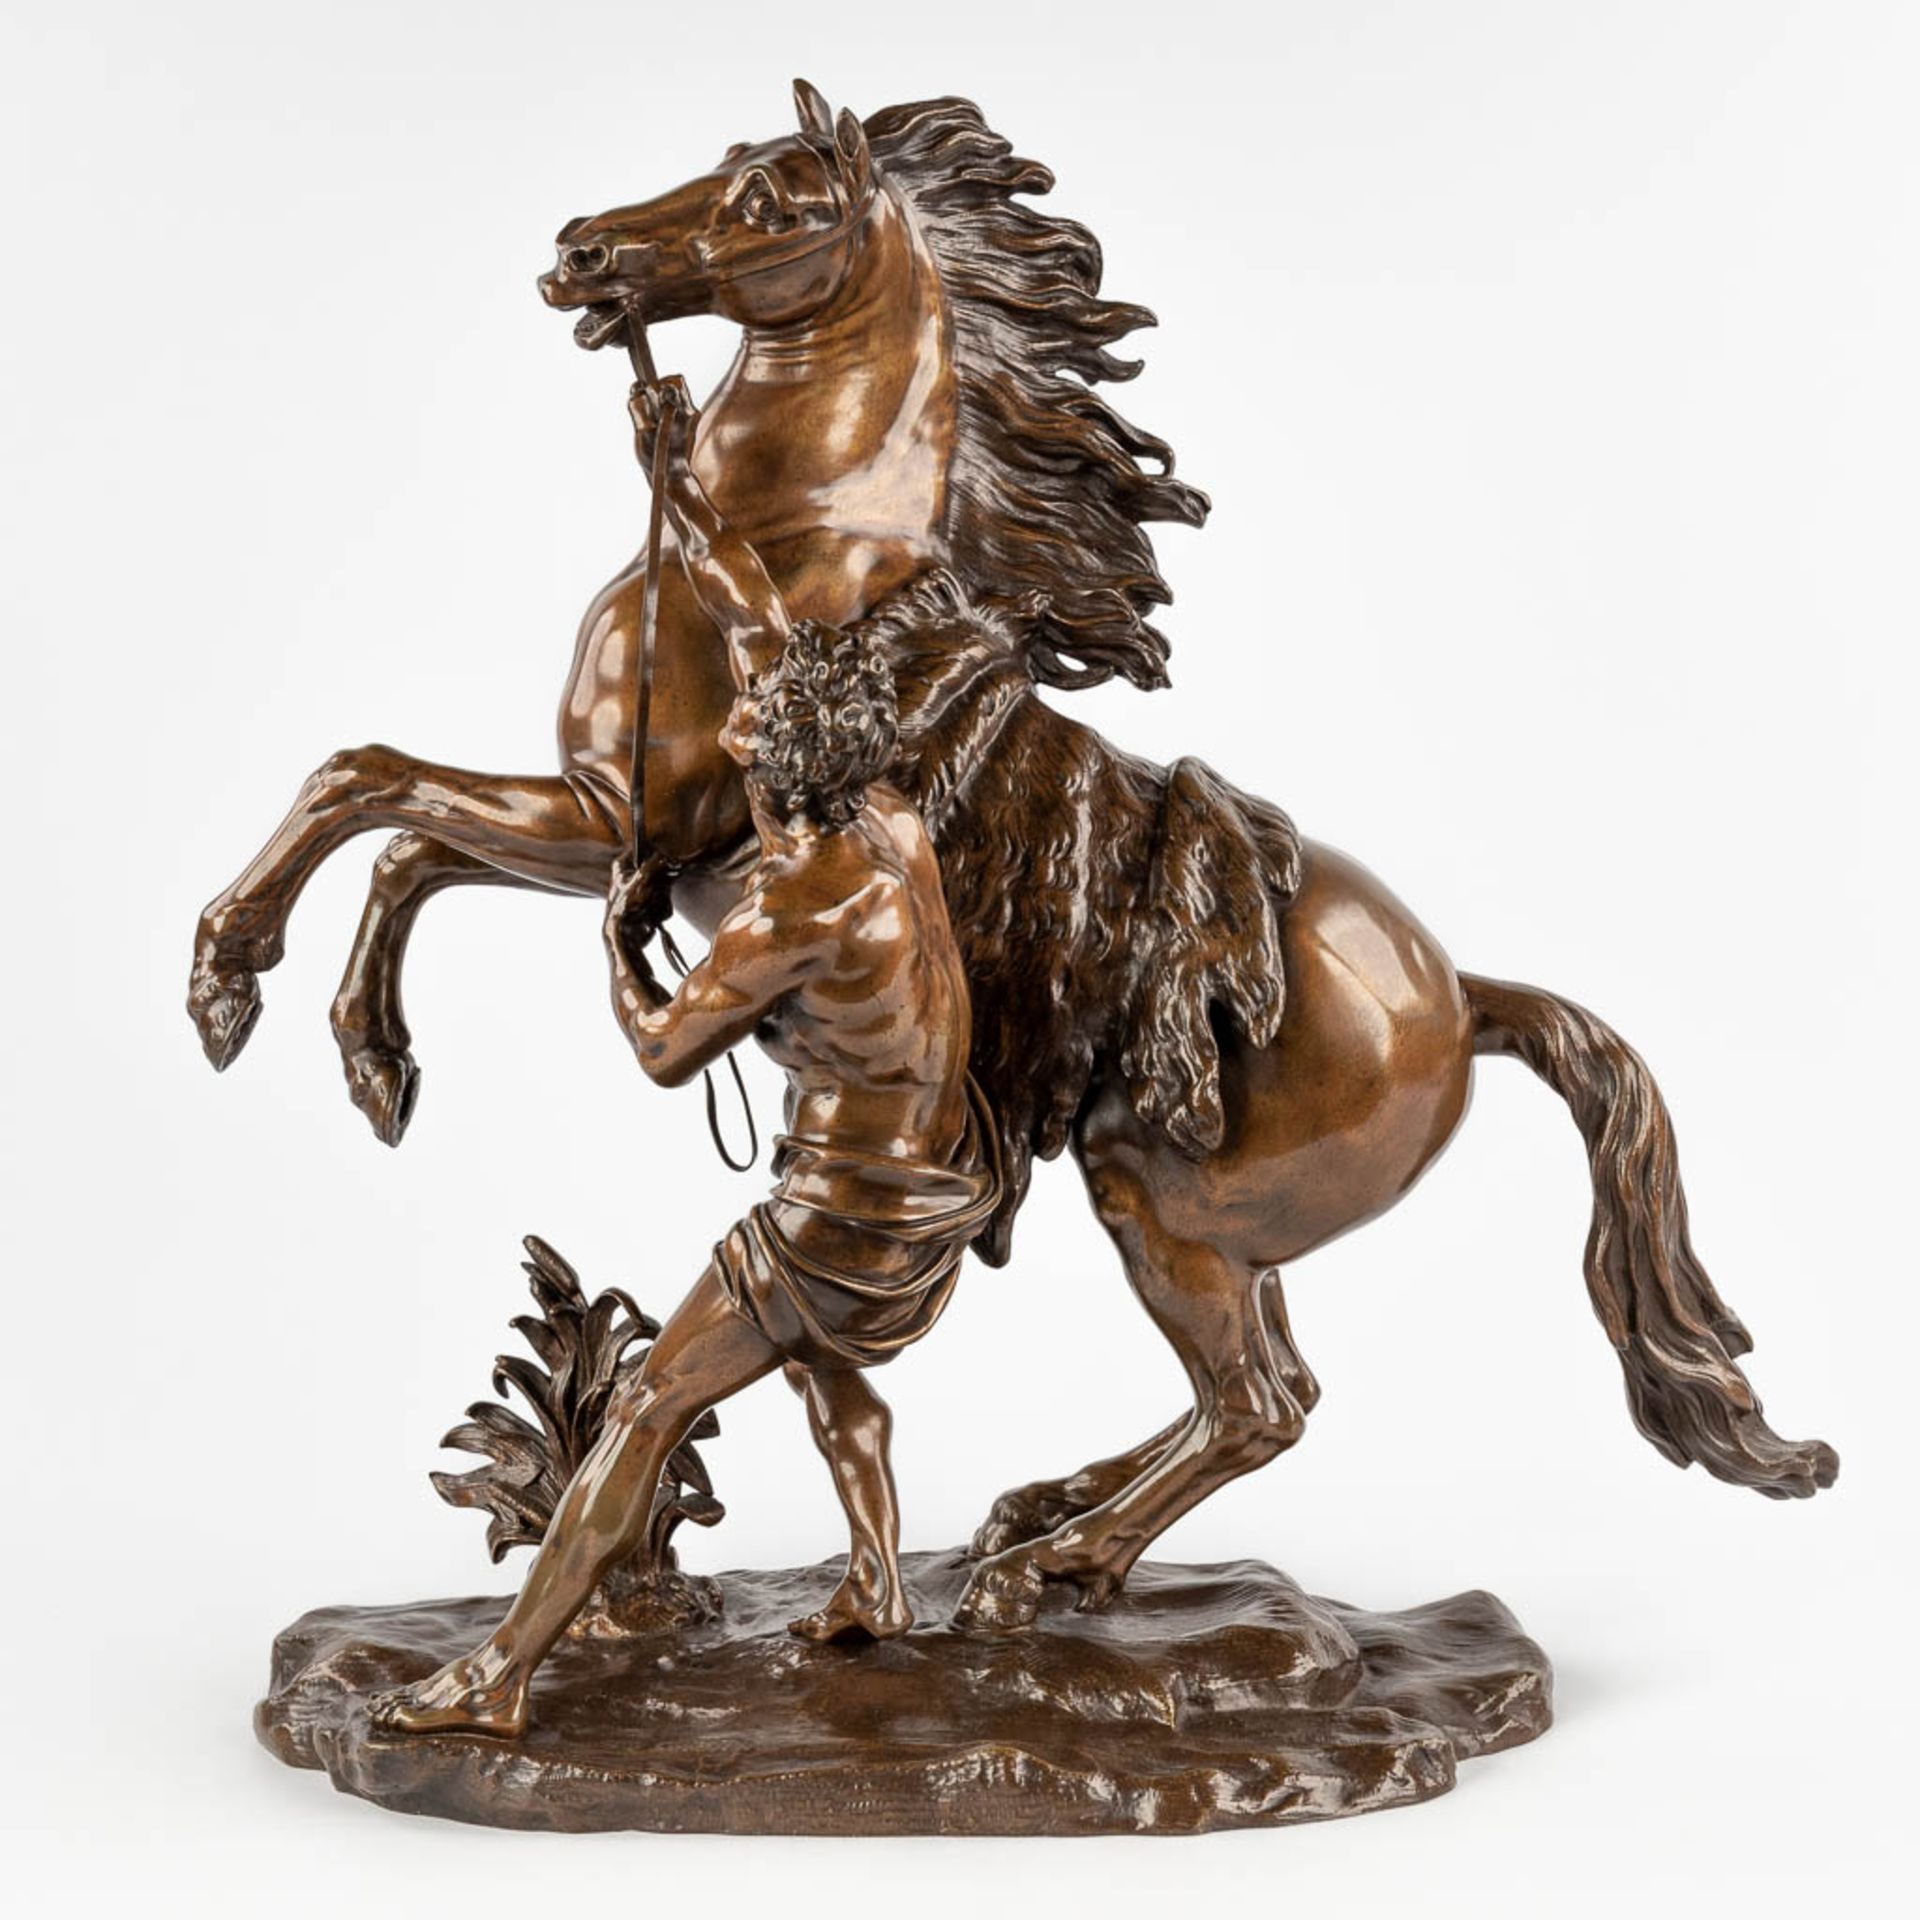 Guillaume I COUSTOU (1677-1746)(after), 'Marly horse' patinated bronze. (D:26 x W:56 x H:58 cm)